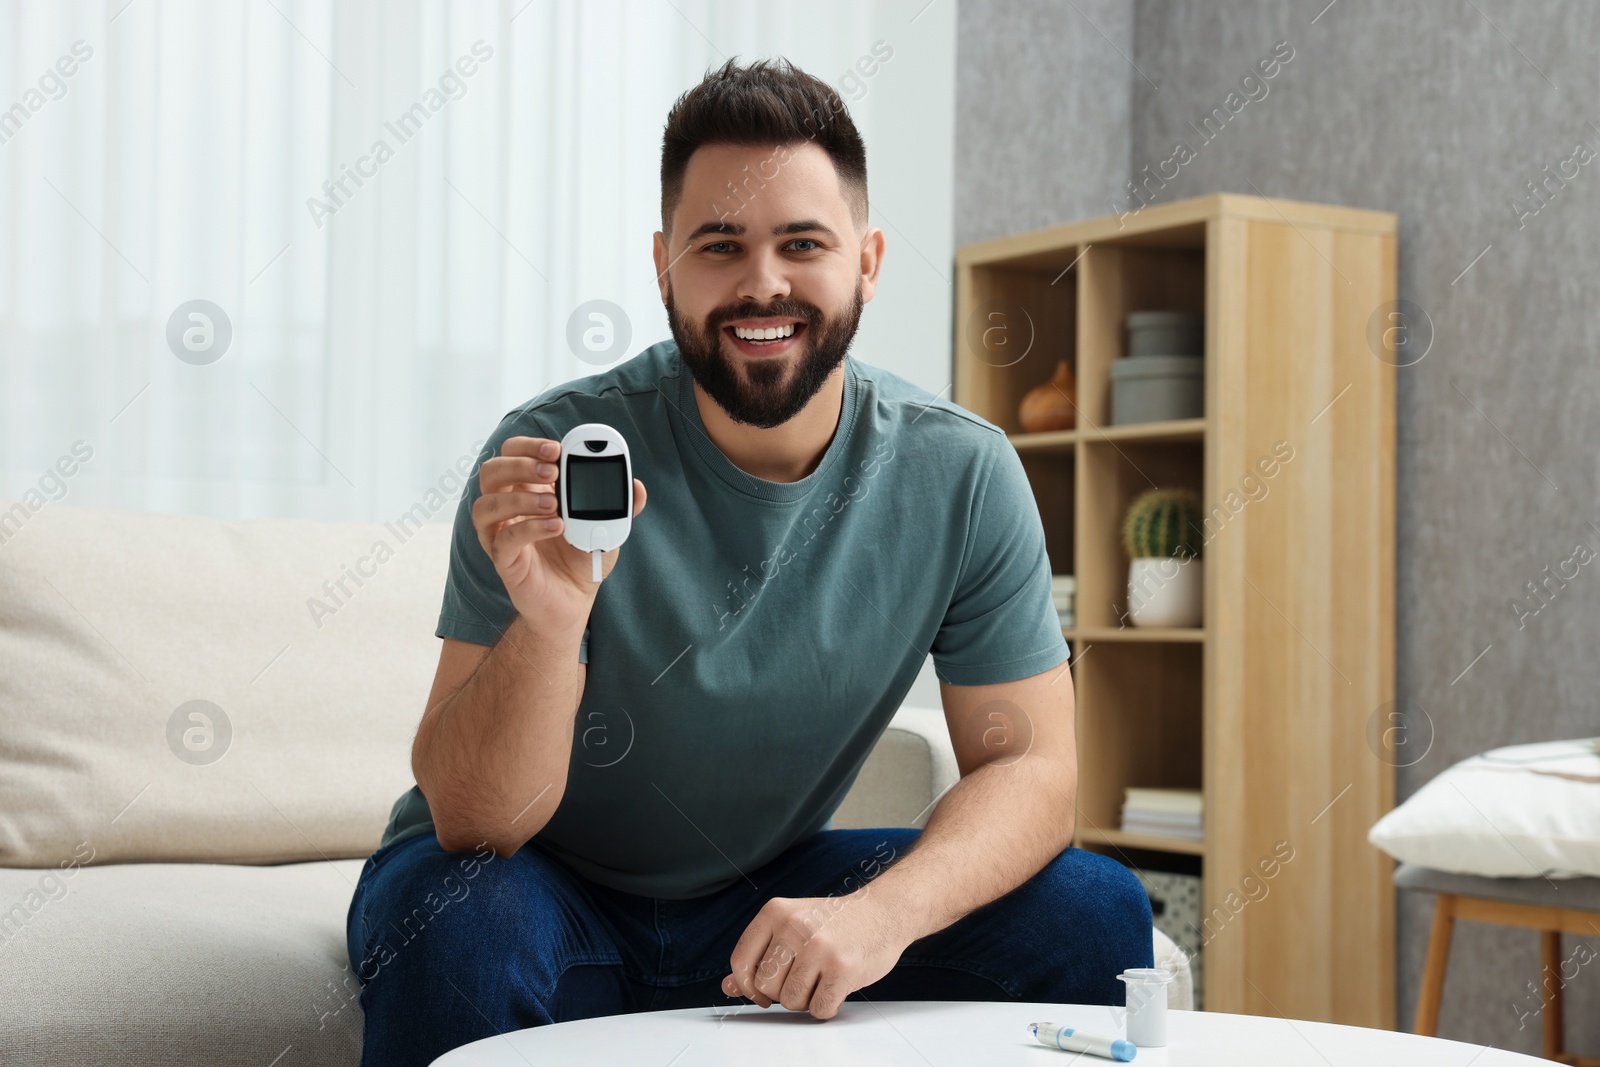 Photo of Diabetes test. Smiling man showing glucometer at home